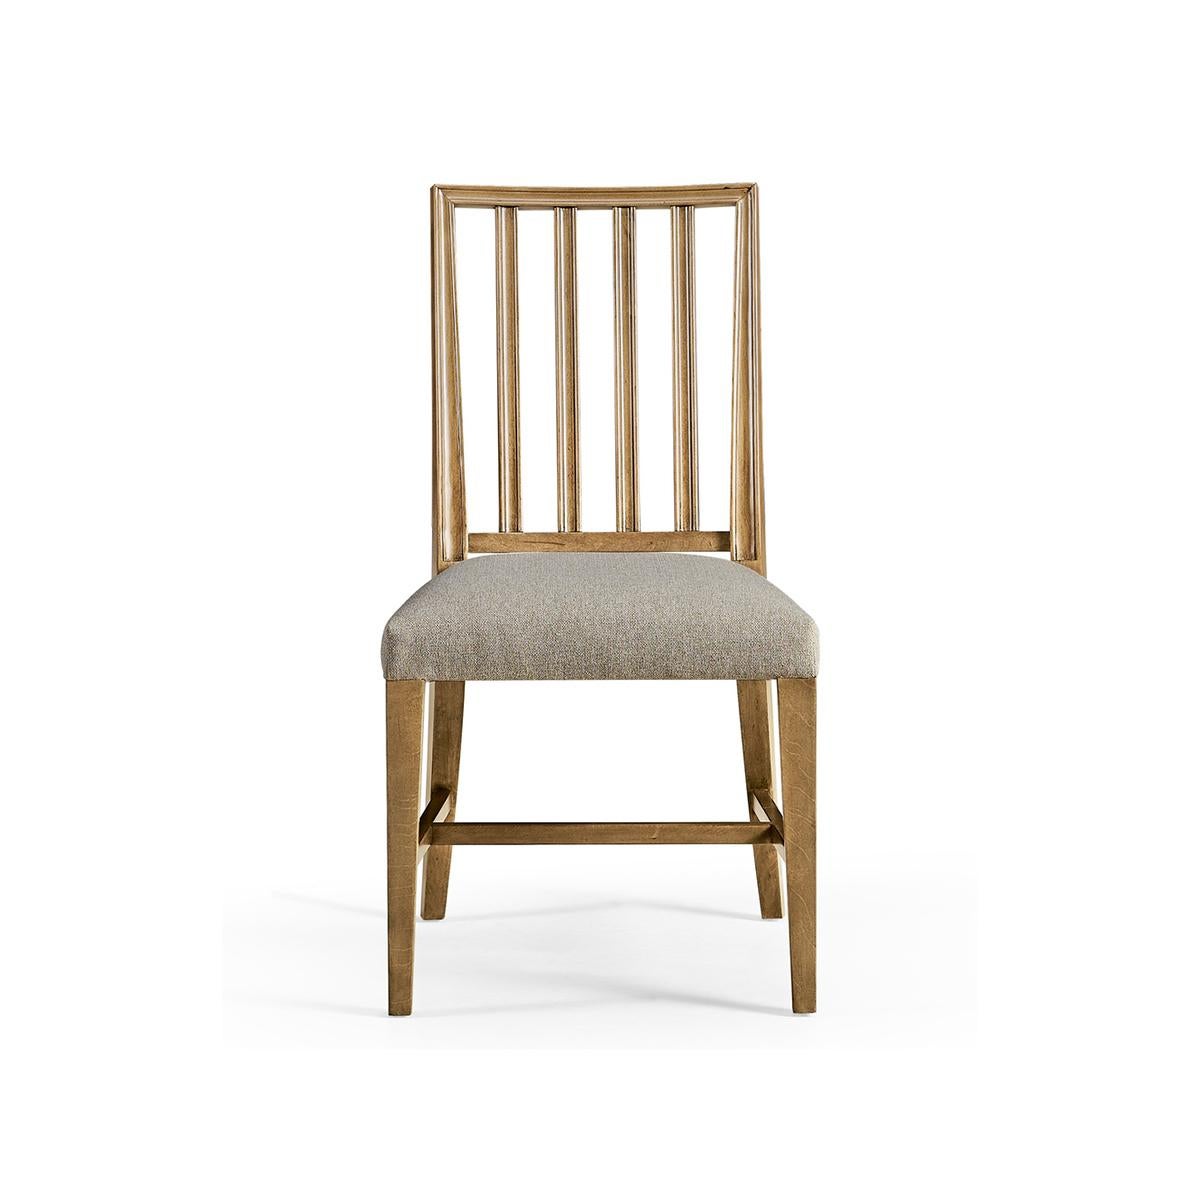 Swedish side chair in our sun bleached cherry finish, with pristine forms and clean lines capable of dressing a dining space up or down with ease. With a molded slat back and a delightfully plush cushion upholstered in a creamy oatmeal performance